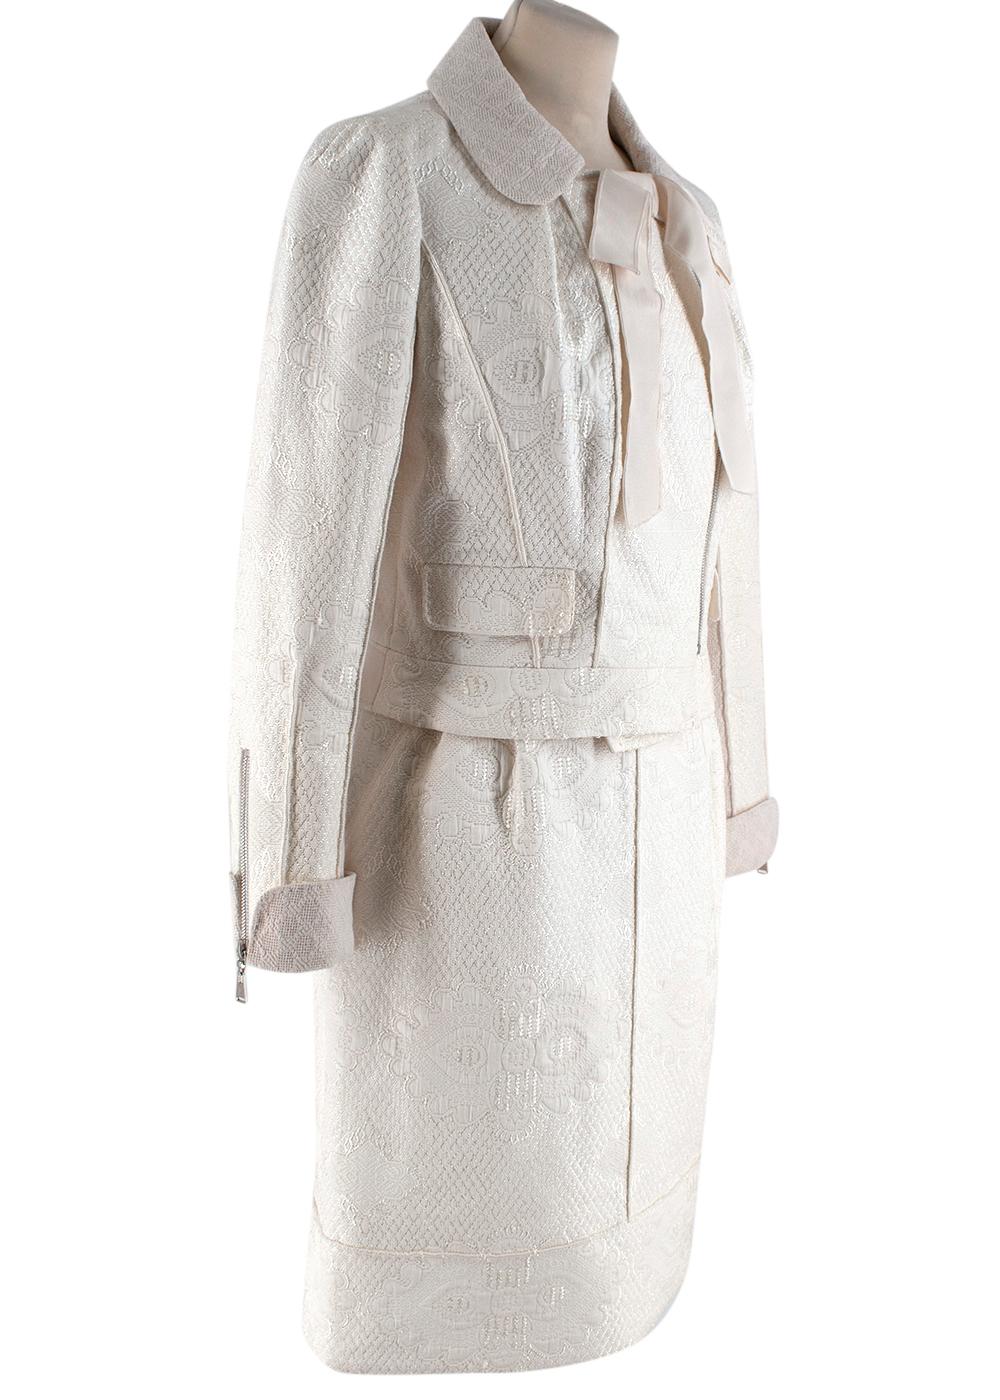 Louis Vuitton Silk Jacket & Skirt Set Size 38 IT

- Jacquard material with diamond weave
- Silver shiny hardware on the zips
- Louis Vuitton monogram silk cream lining
- Pencil skirt has side pockets & pleats 
- Jacquard is pattern matched